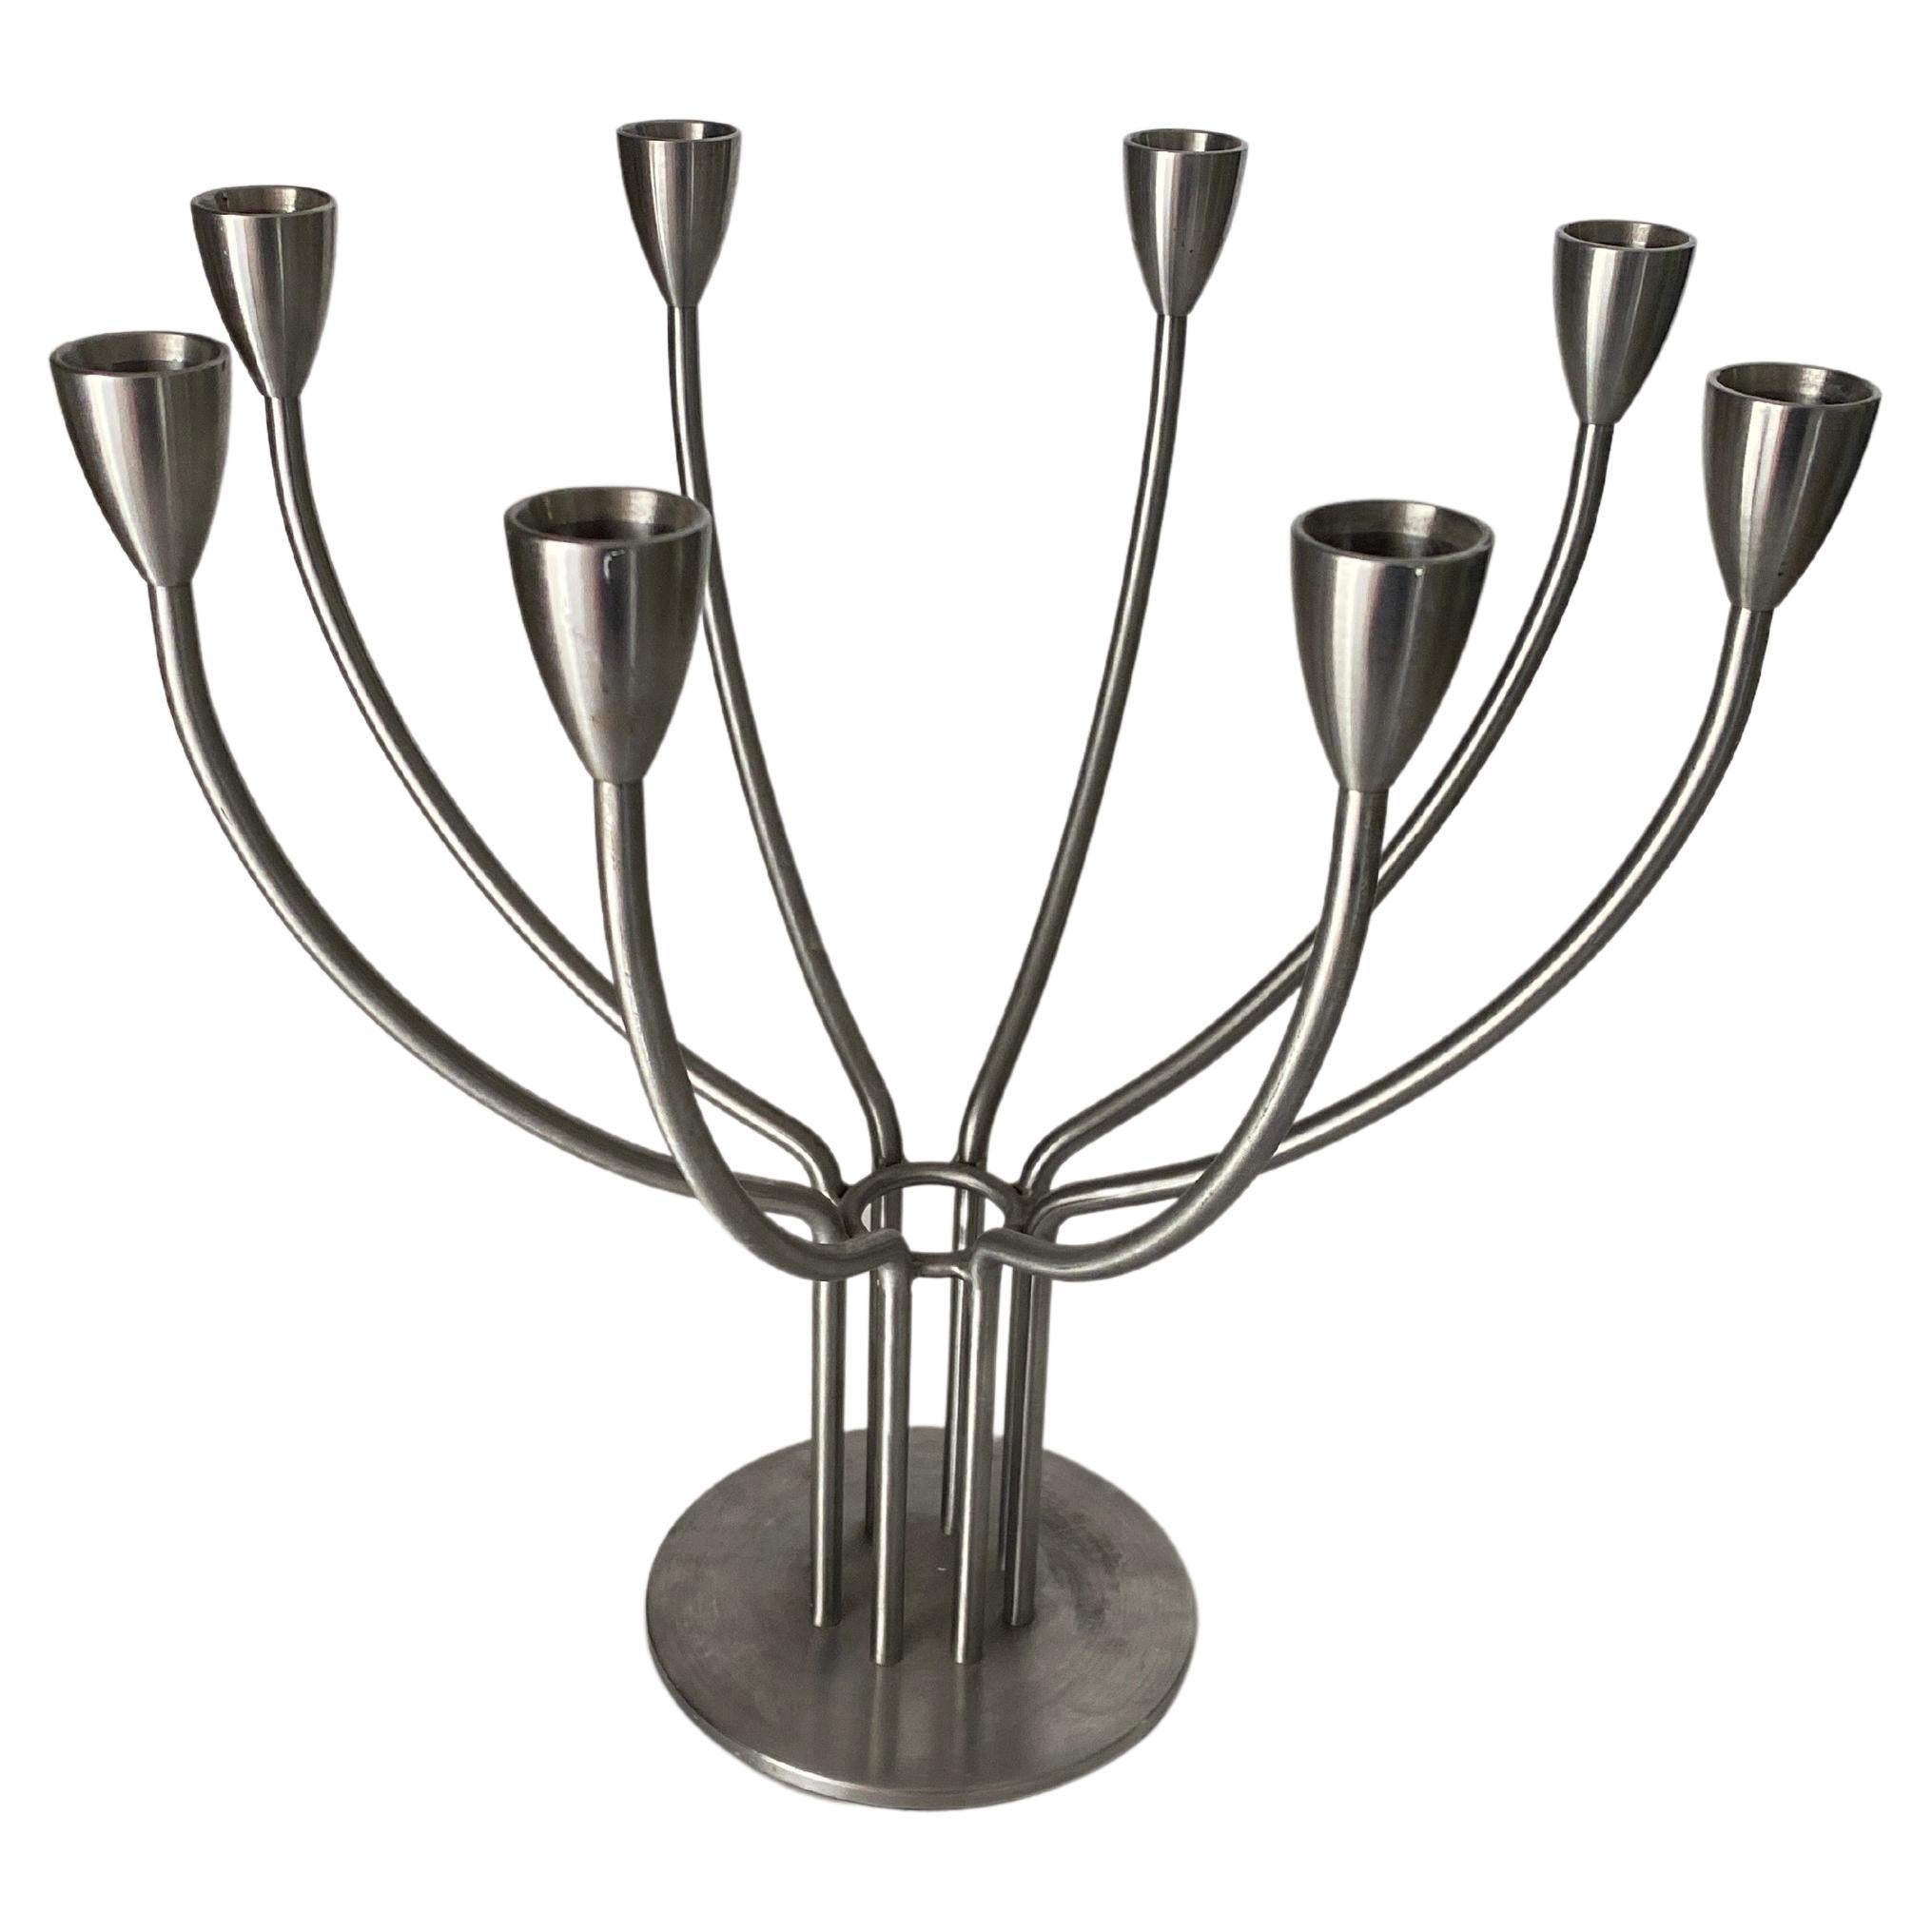 Metal Candleholder by Hagberg Swenden 20th Century Siver color 8 Arms For Sale